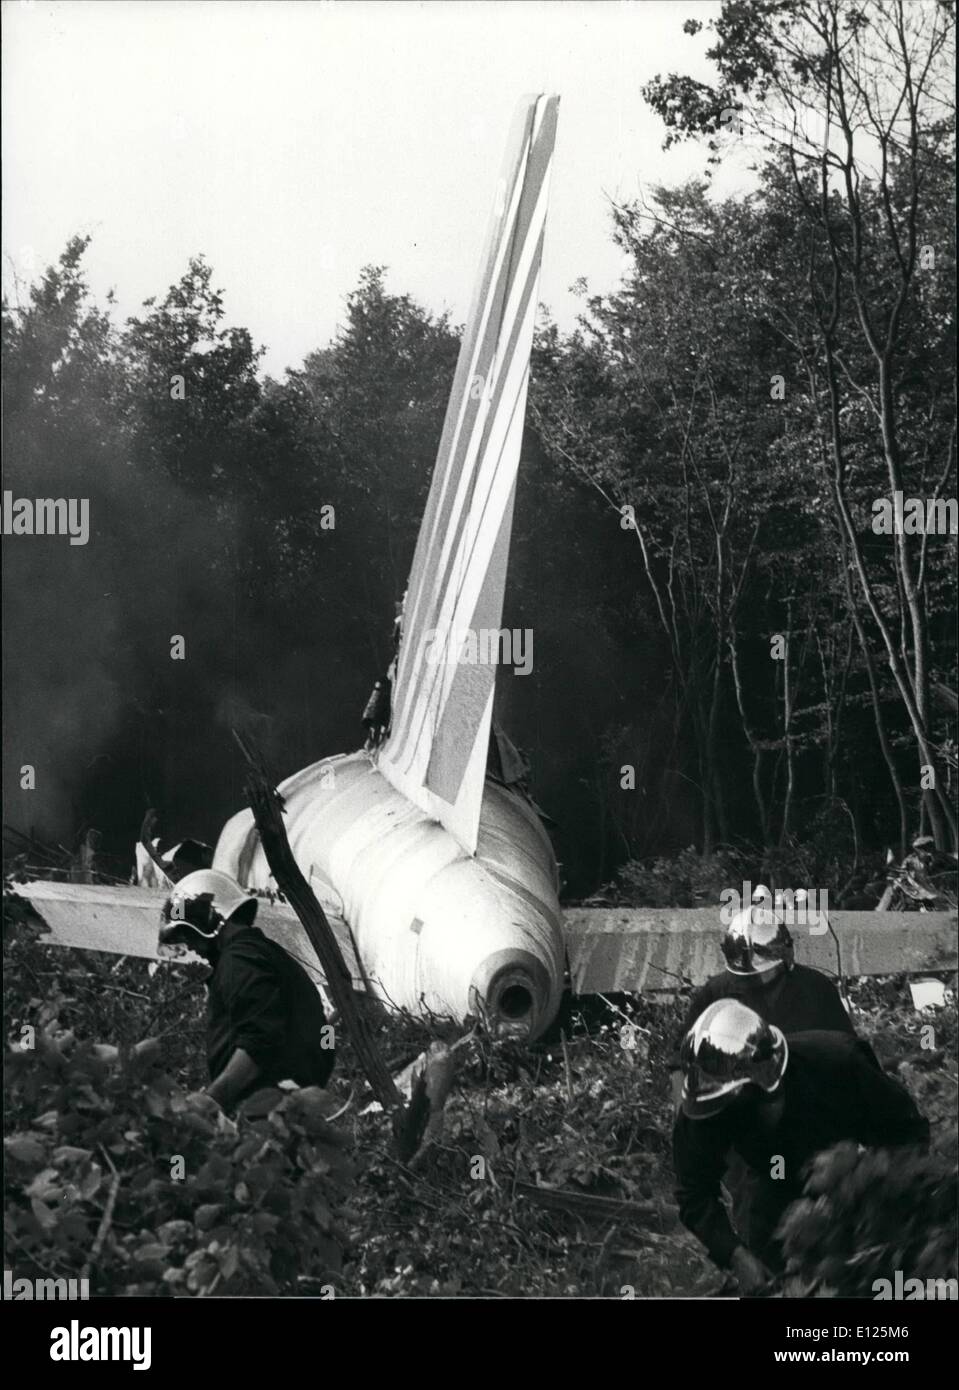 Jun. 06, 1988 - Reasons for Airbus crash still unclear ; After the crash of the Air France passenger Jet airbus A 320 experts are still unclear about the causes of the disaster. the plane crashed Sunday afternoon near type airport of mulhouse (France) and killed four people. Some ten passengers are still missing and about forty suffered from injuries. The A 320 it the first plane type which is flown completely ''by wire'', by digital electric contact rather than traditional direct mechanical construction. picture shows police and fire department officials looking for victims after the crash. Stock Photo